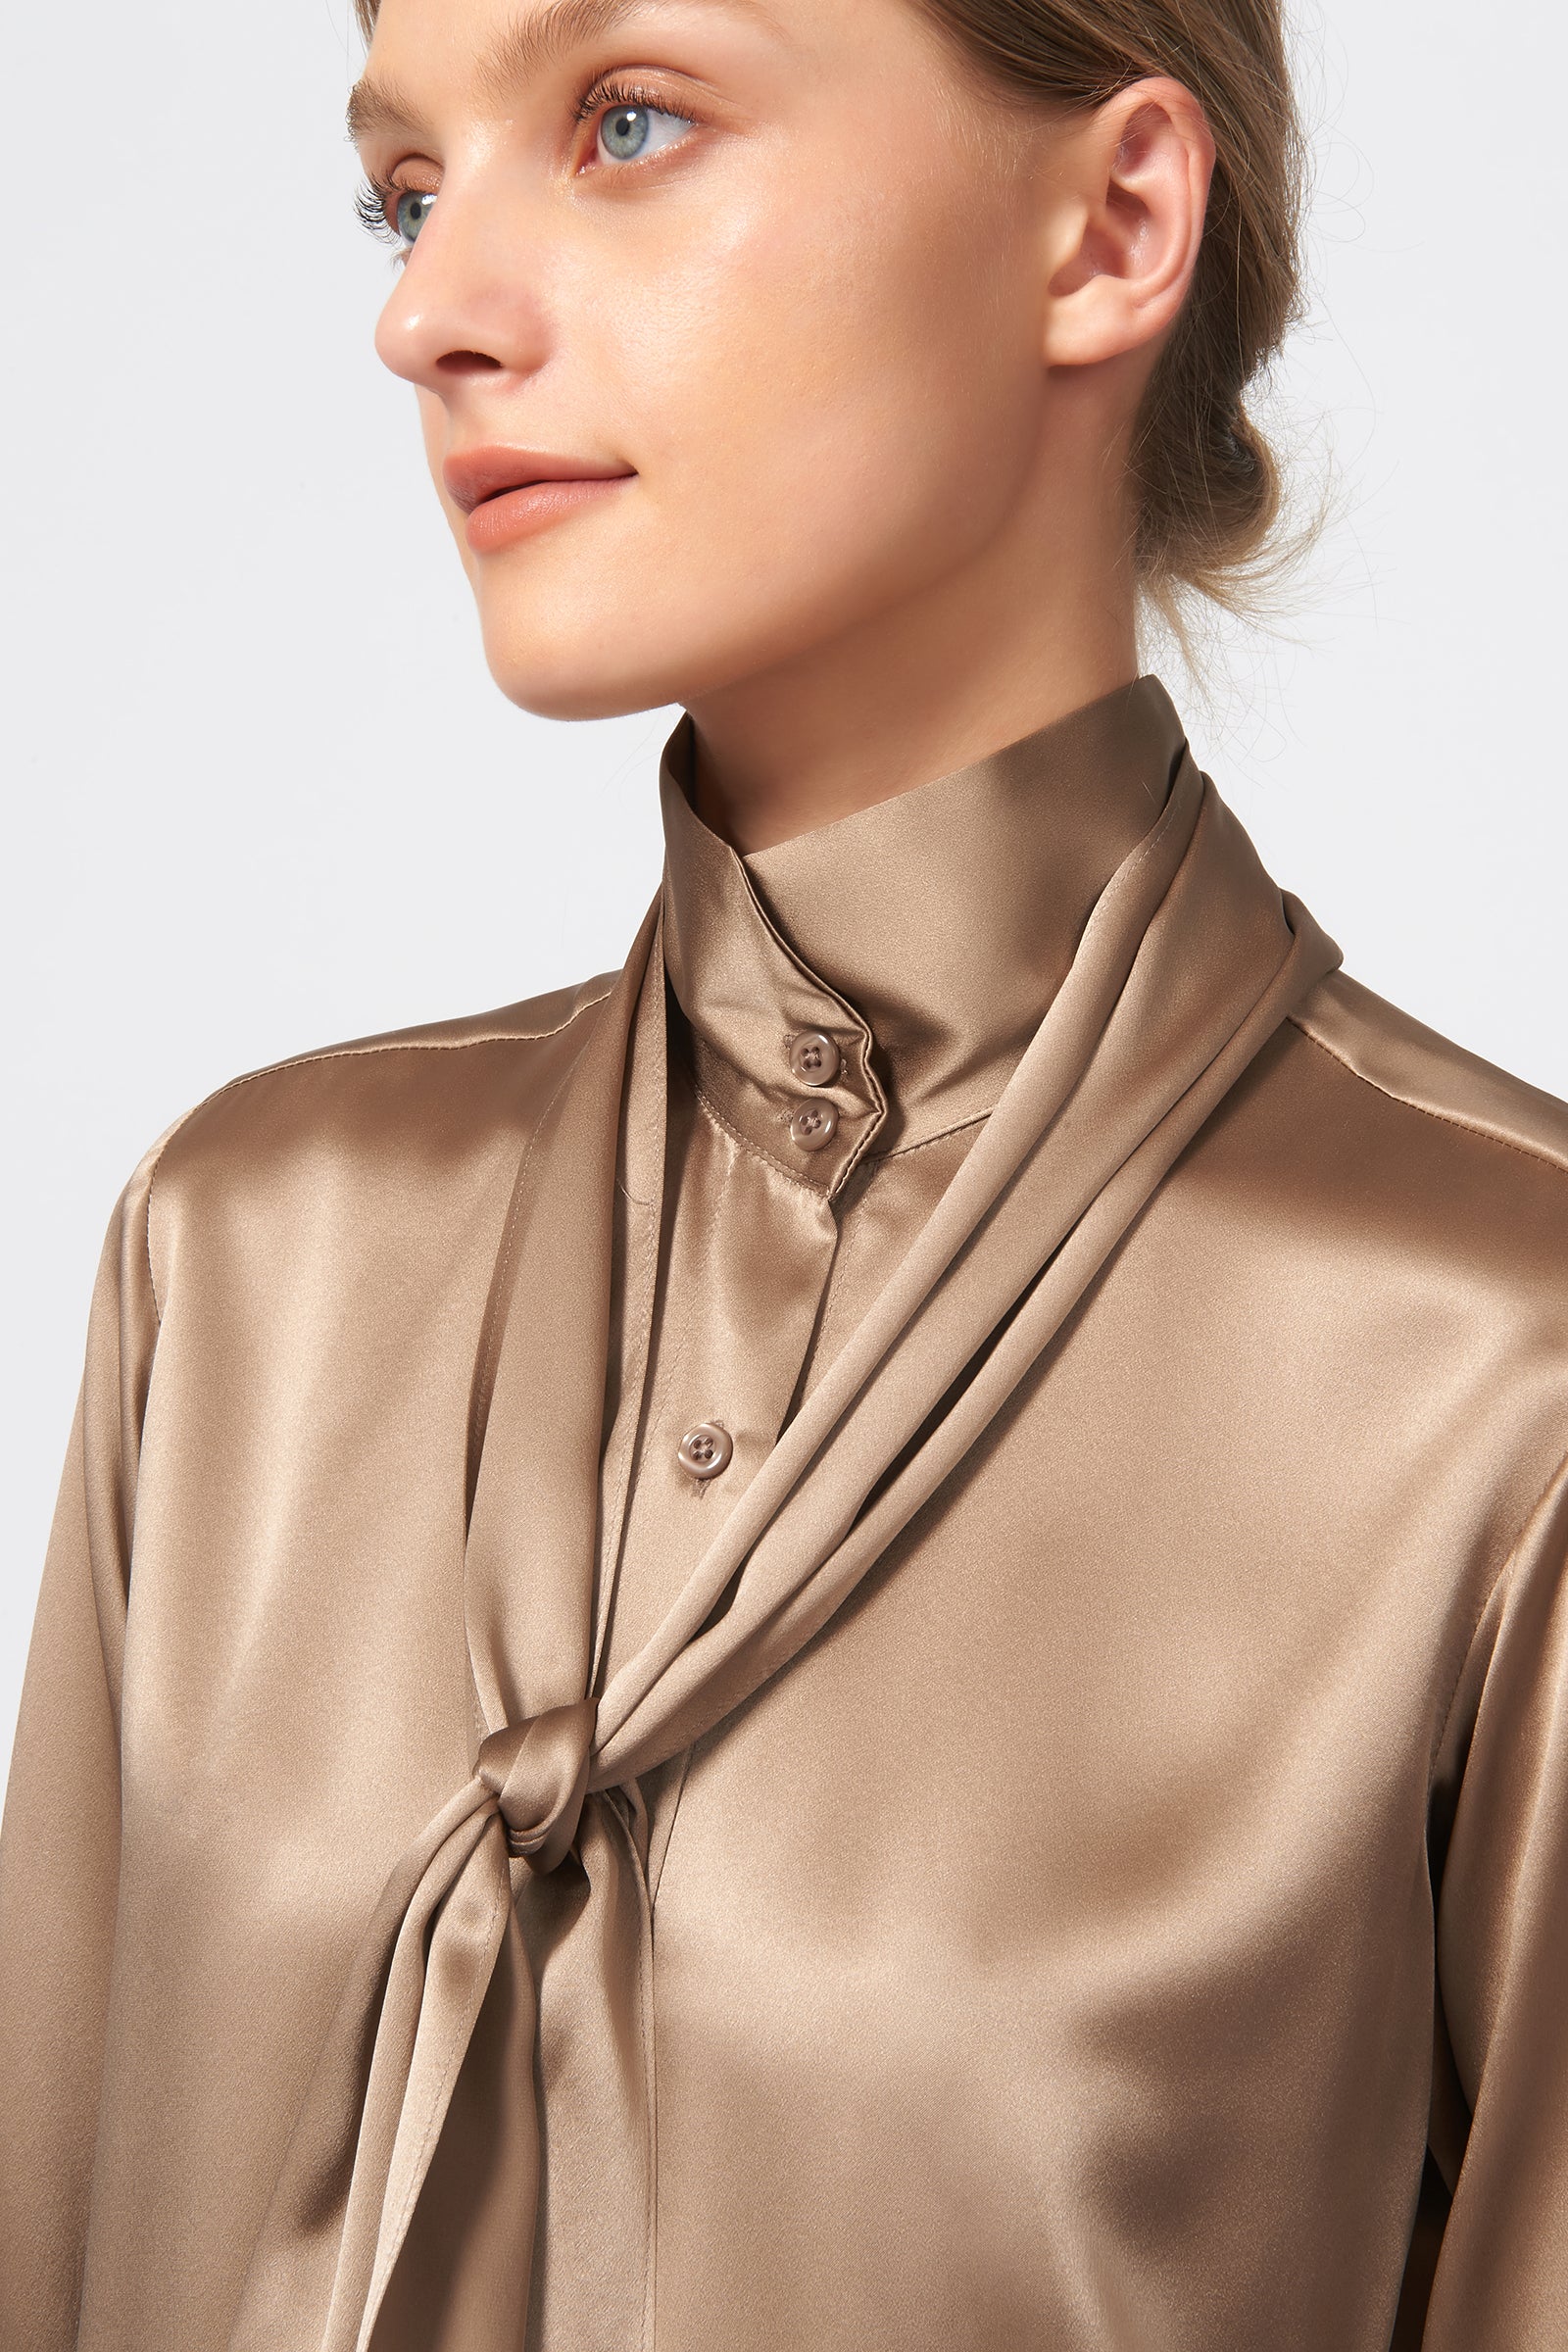 Kal Rieman Scarf Tie Blouse in Charmeuse on Model Front Detail View